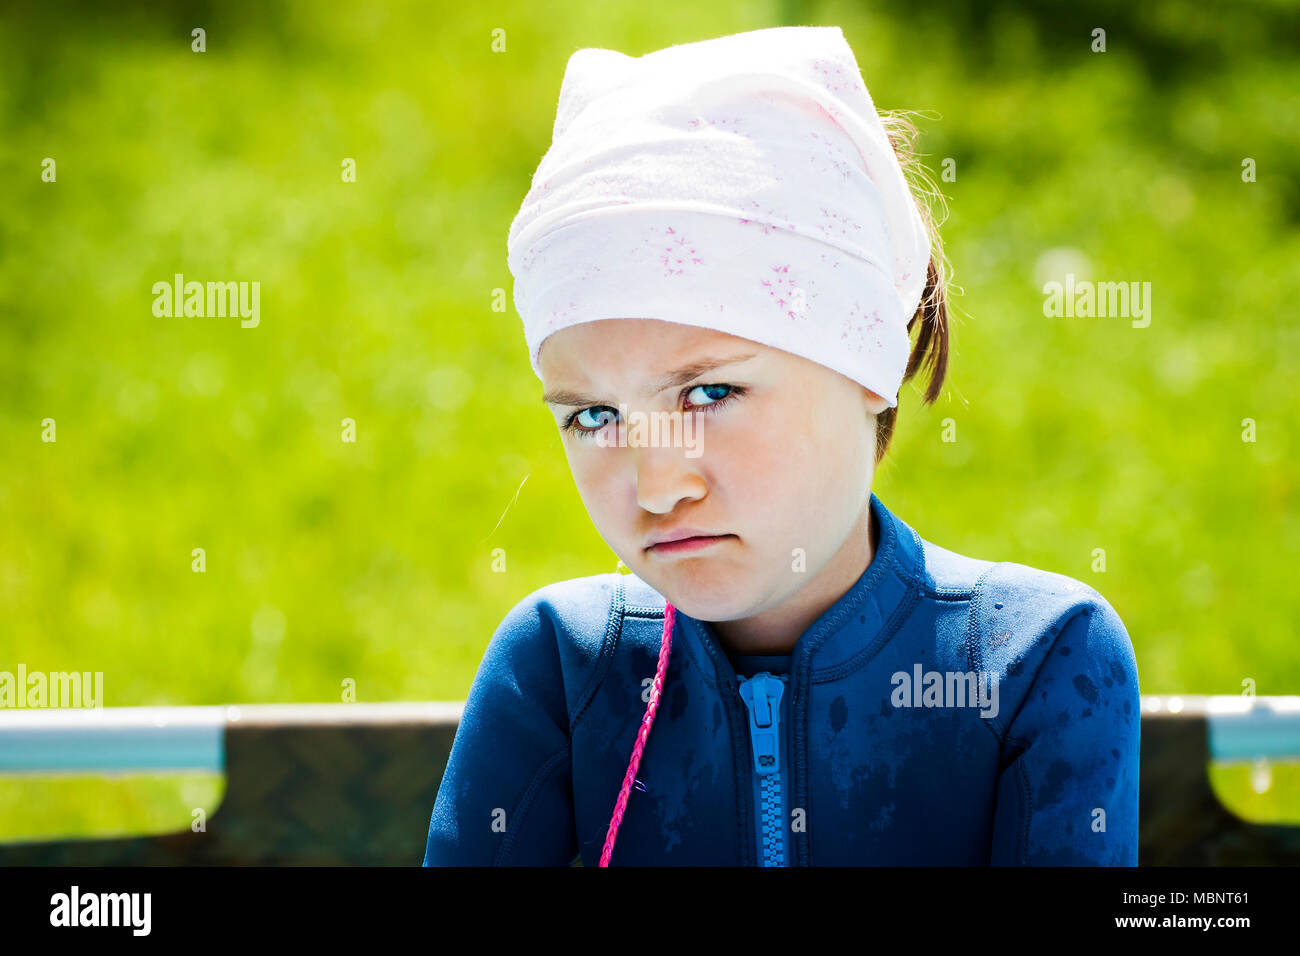 Portrait of girl with angry upset face expression, outdoor. Stock Photo